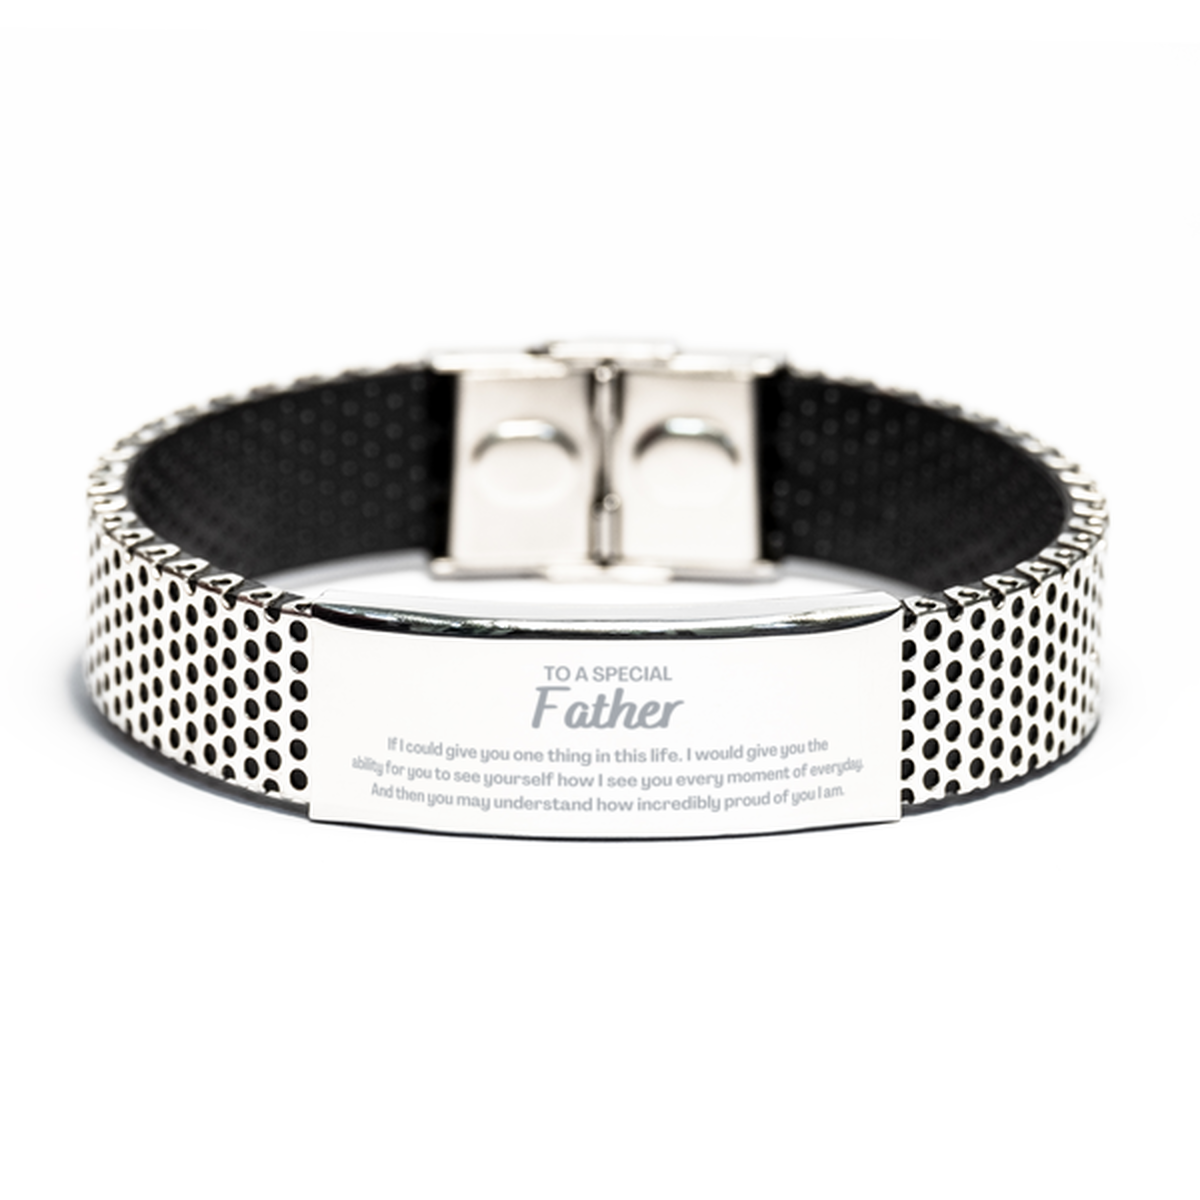 To My Father Stainless Steel Bracelet, Gifts For Father Engraved, Inspirational Gifts for Christmas Birthday, Epic Gifts for Father To A Special Father how incredibly proud of you I am